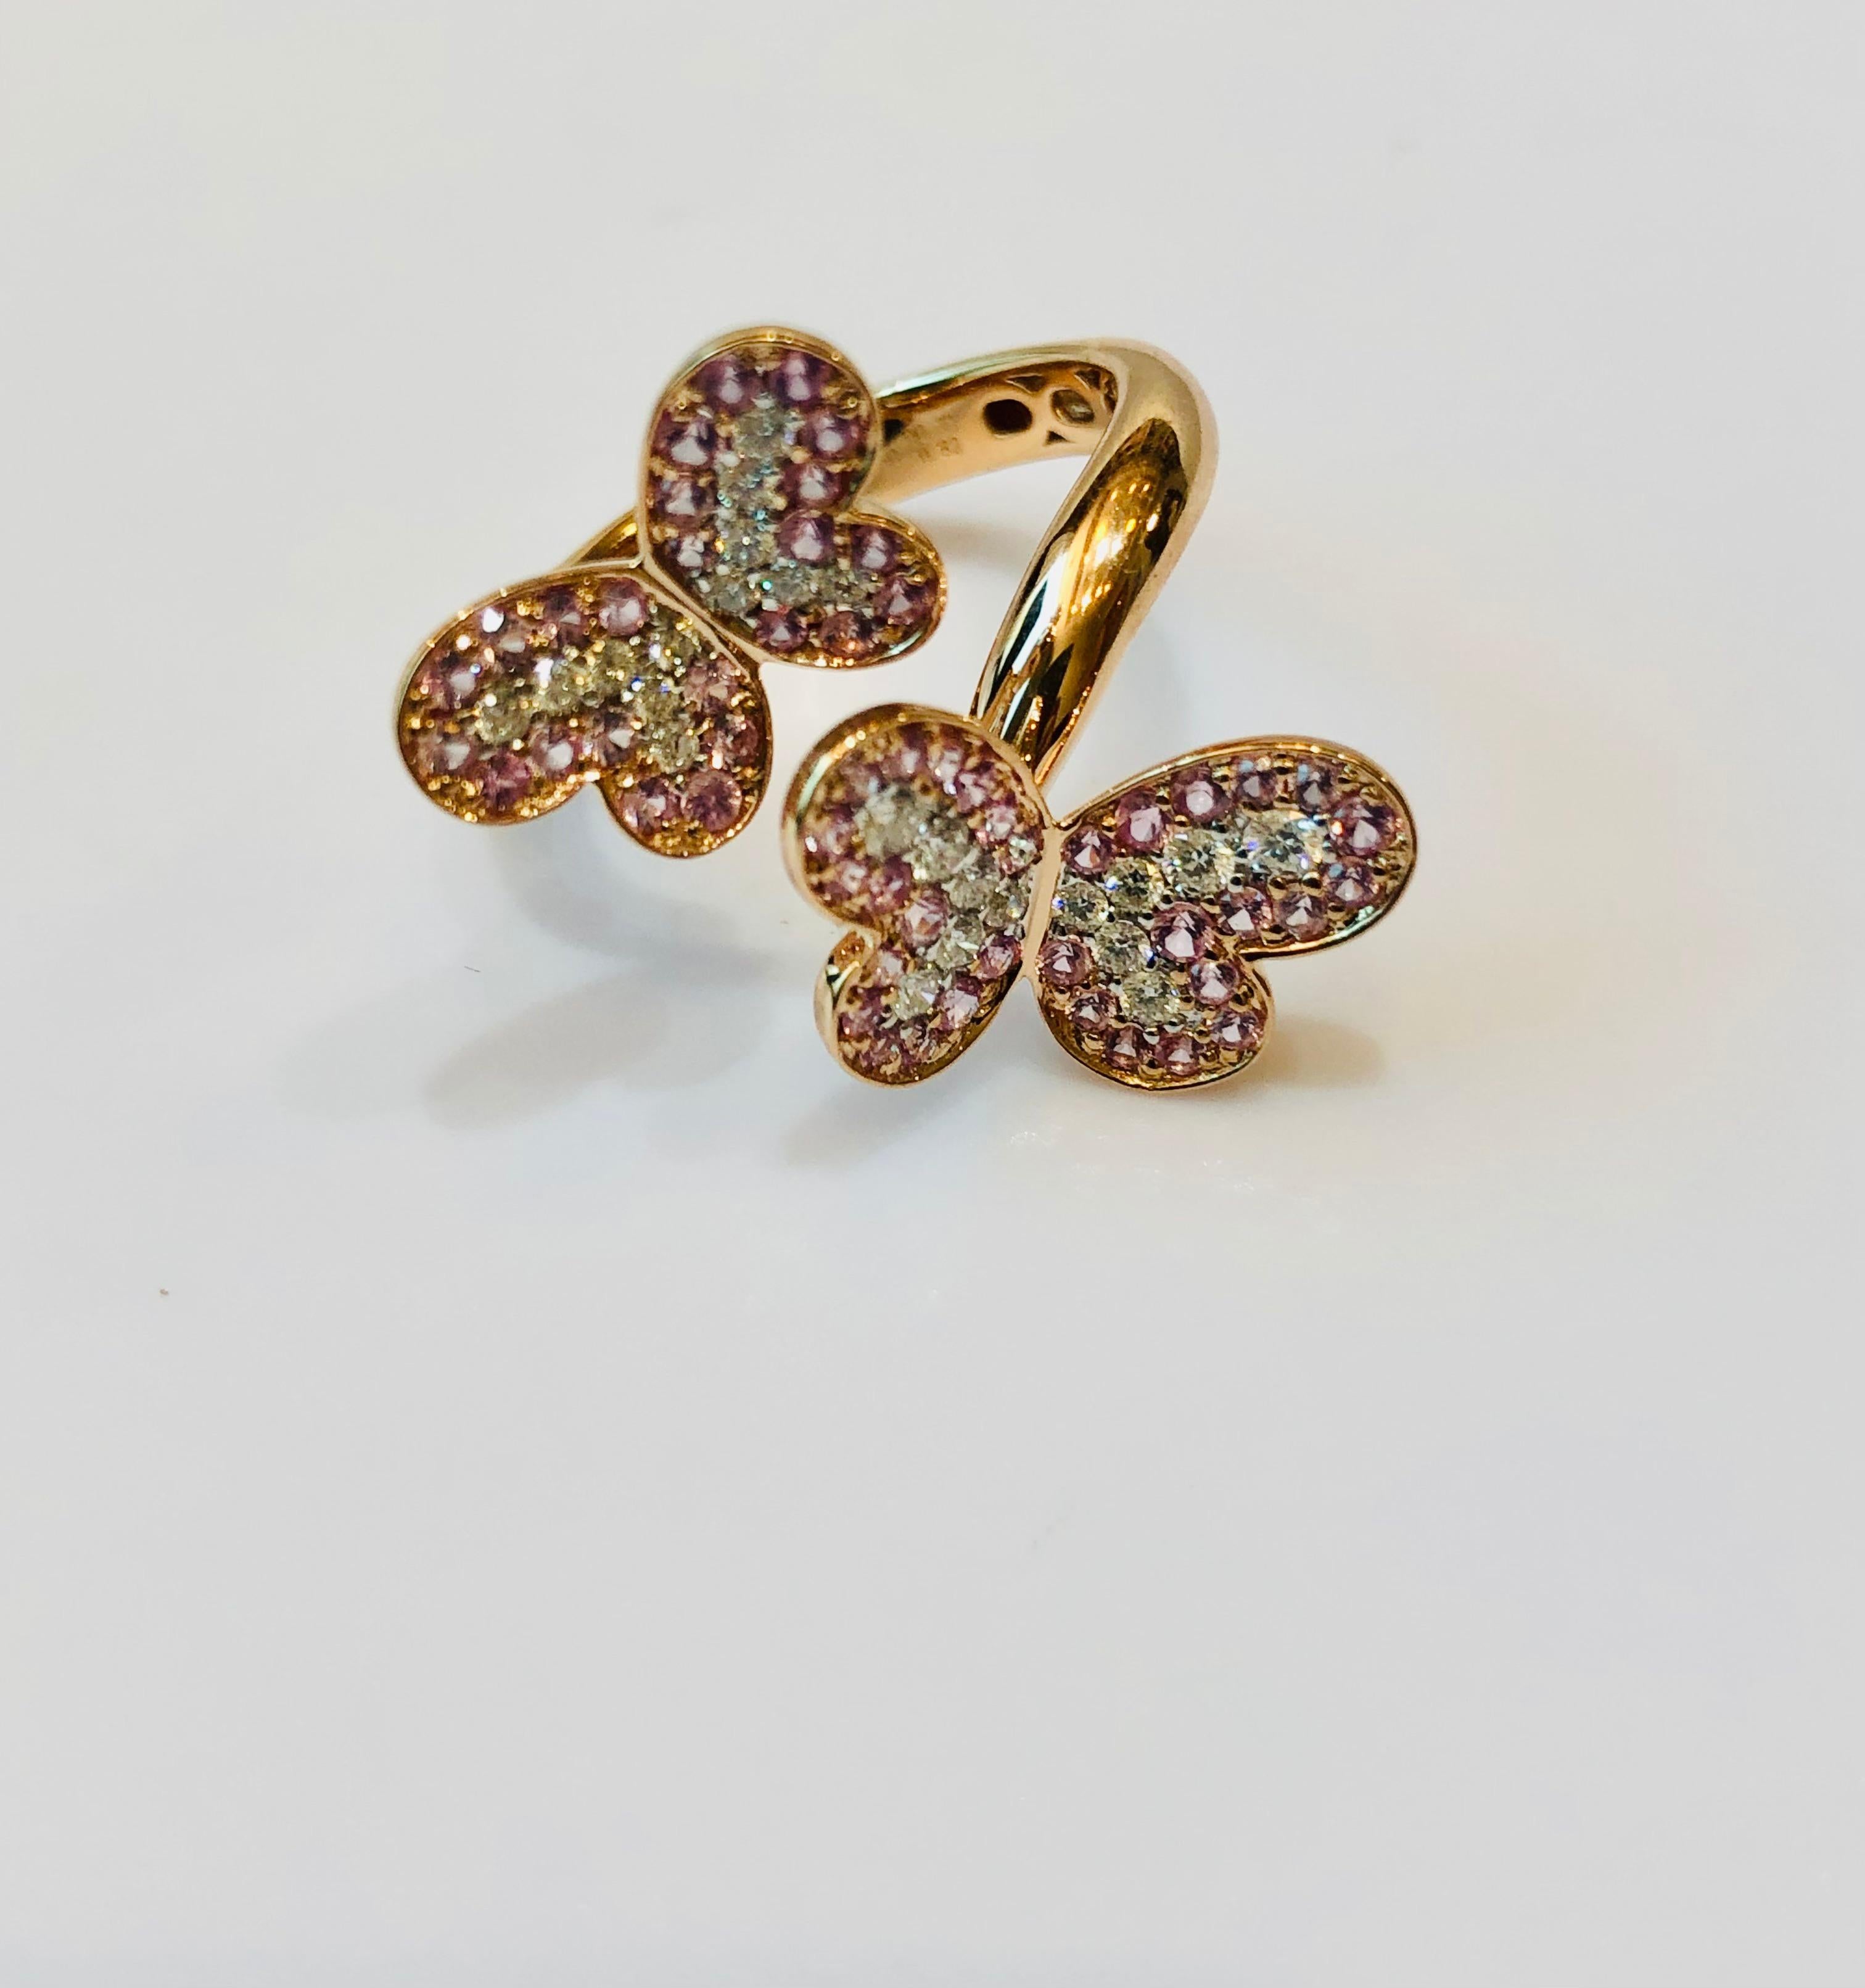 Brilliant Cut Butterfly Diamond and Pink Saphires in 18k Yellow Gold Earrings For Sale